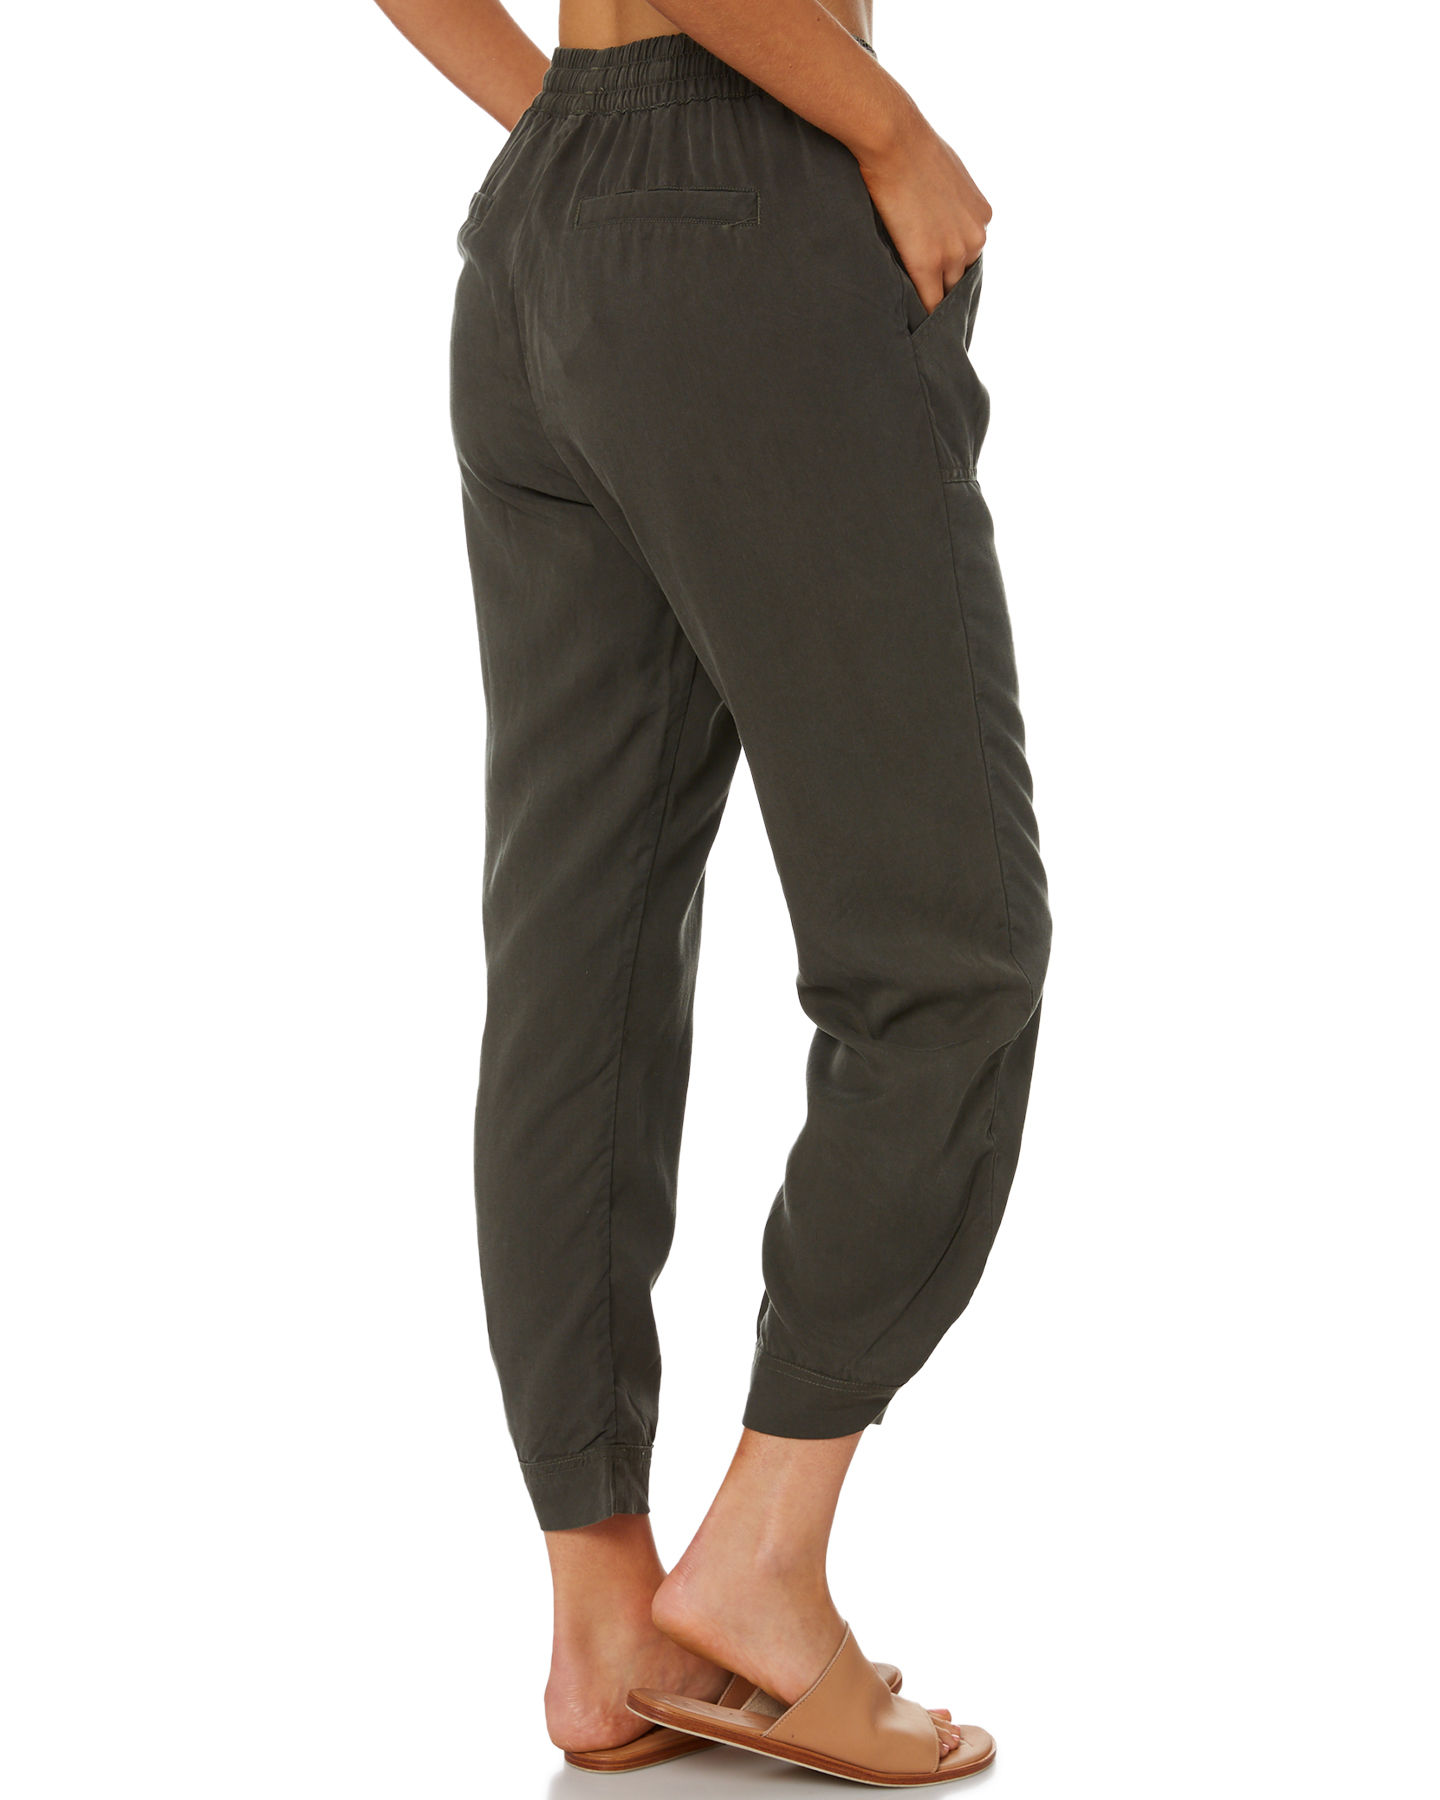 Rusty Bounds Slouchy Pant - Dark Olive | SurfStitch